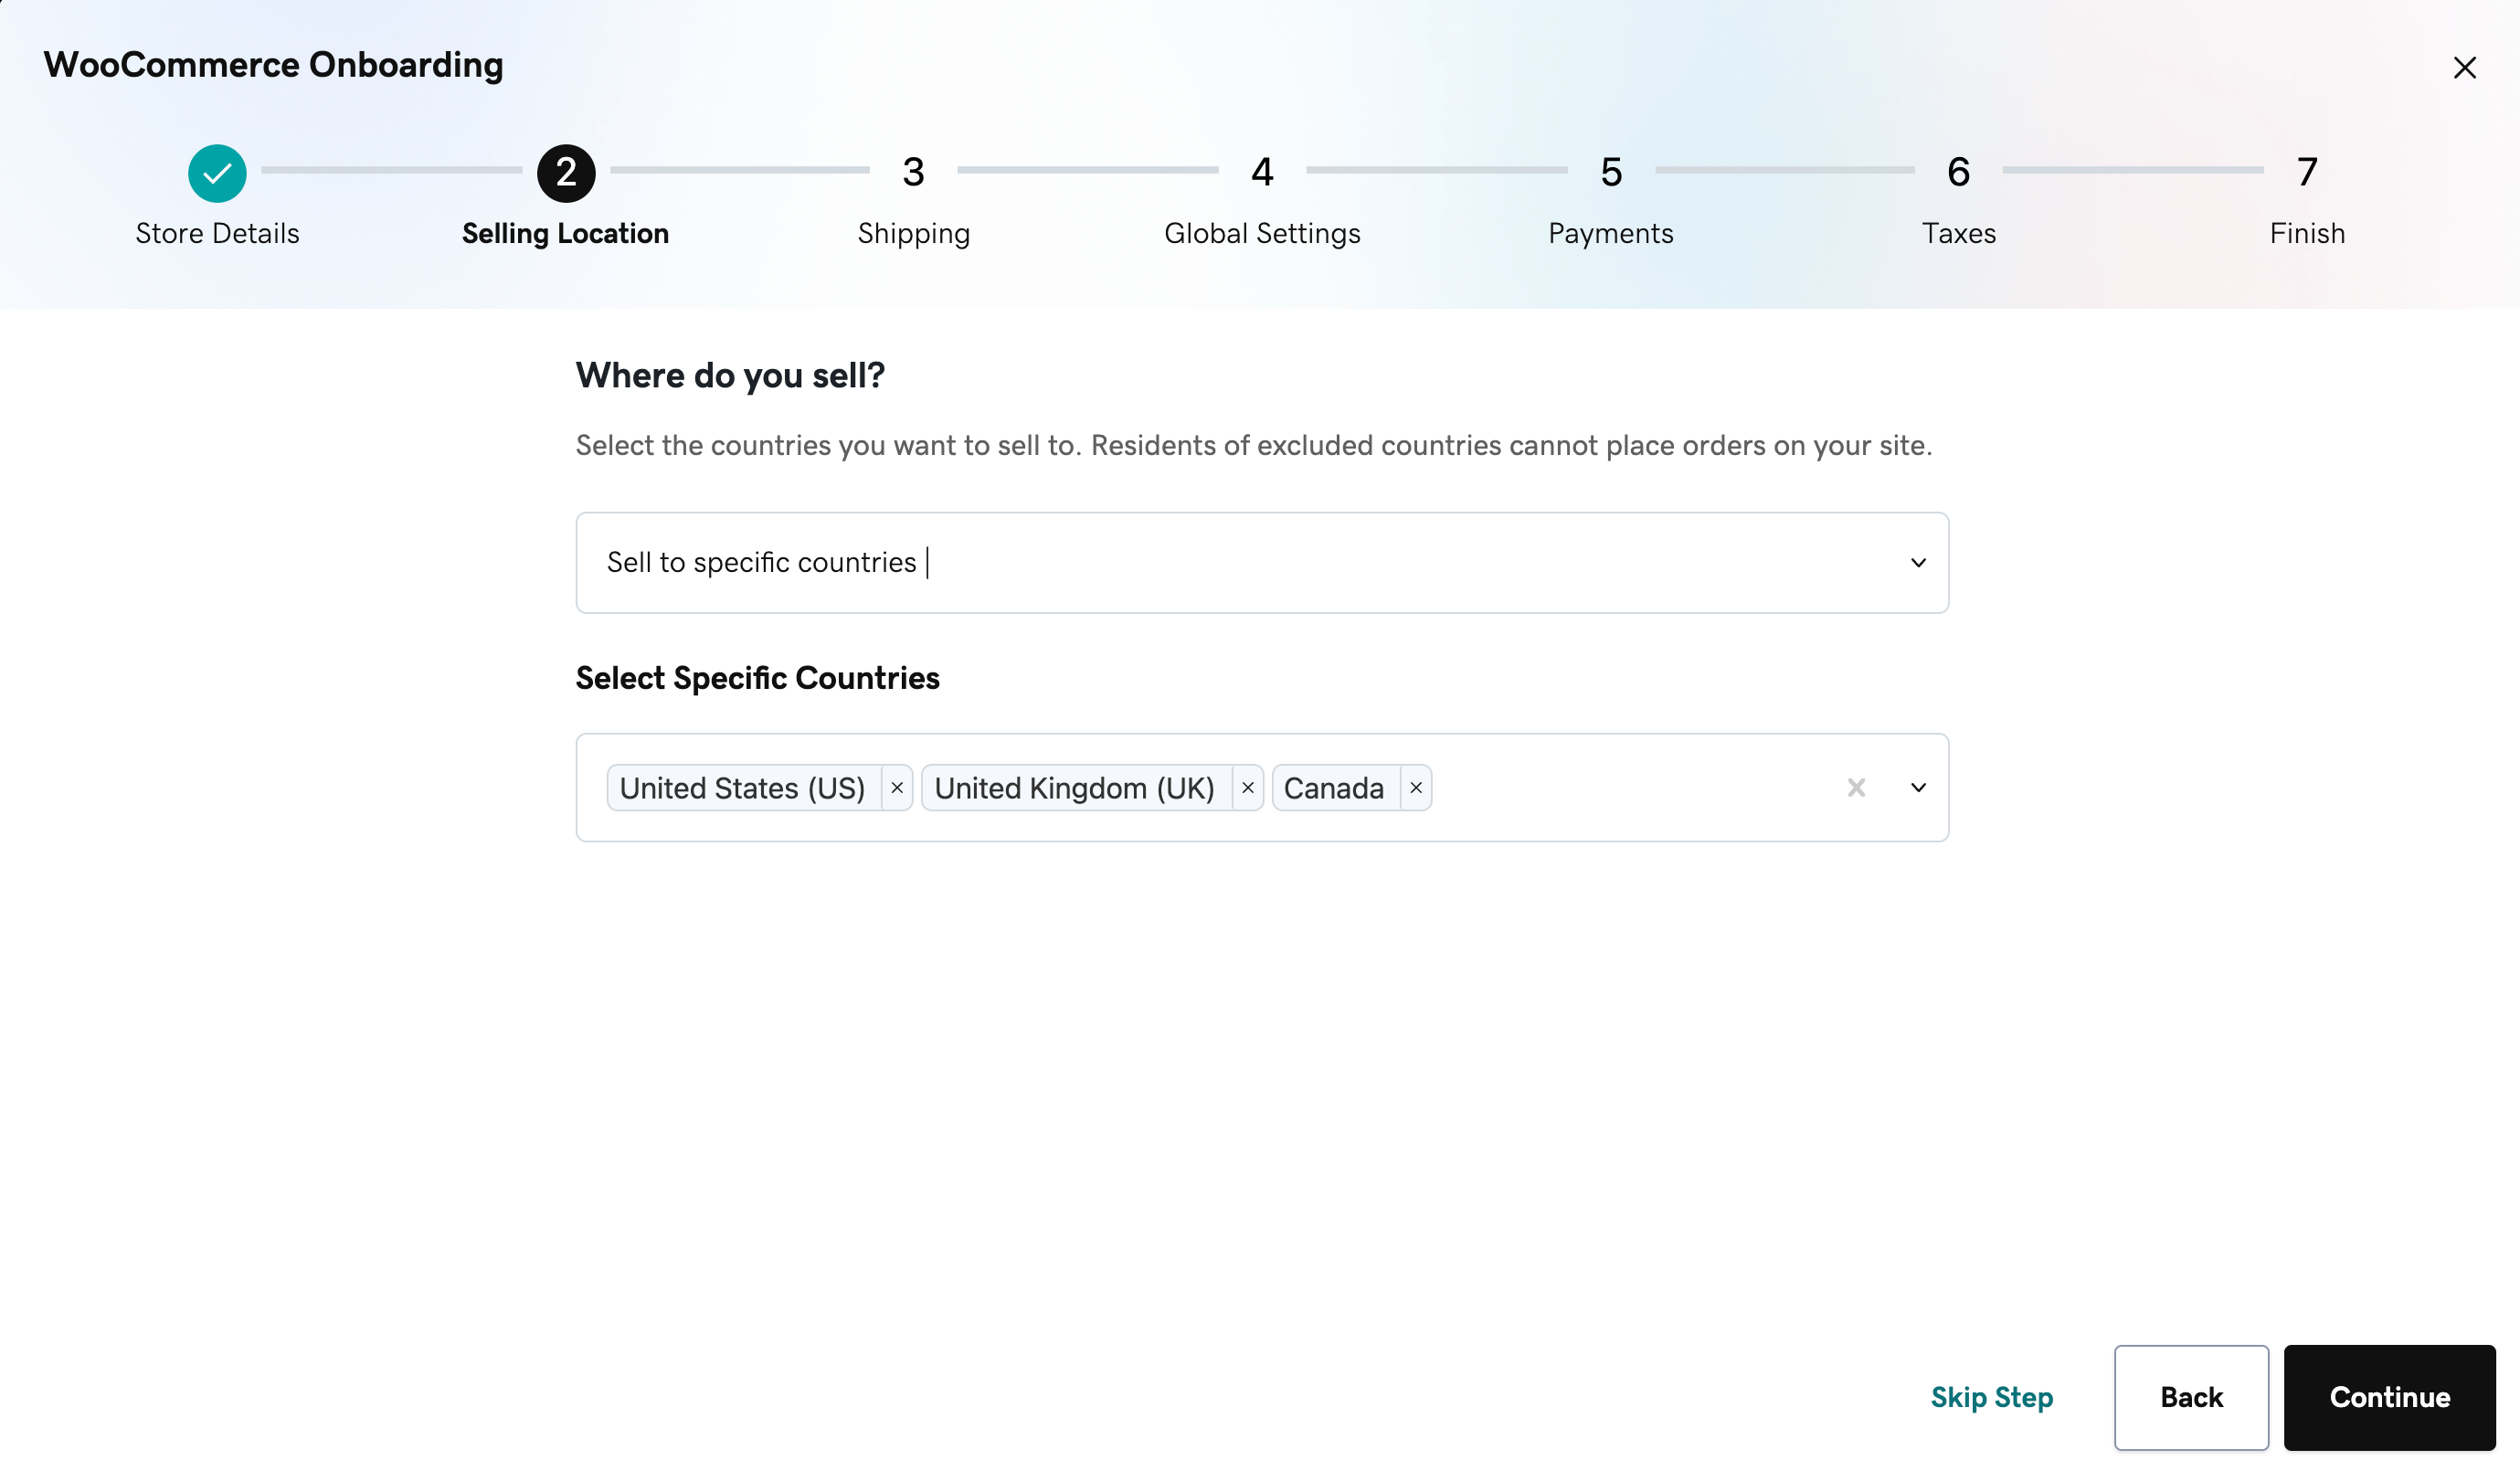 Options to enable relevant to the shipping method for the shop during the onboarding wizard